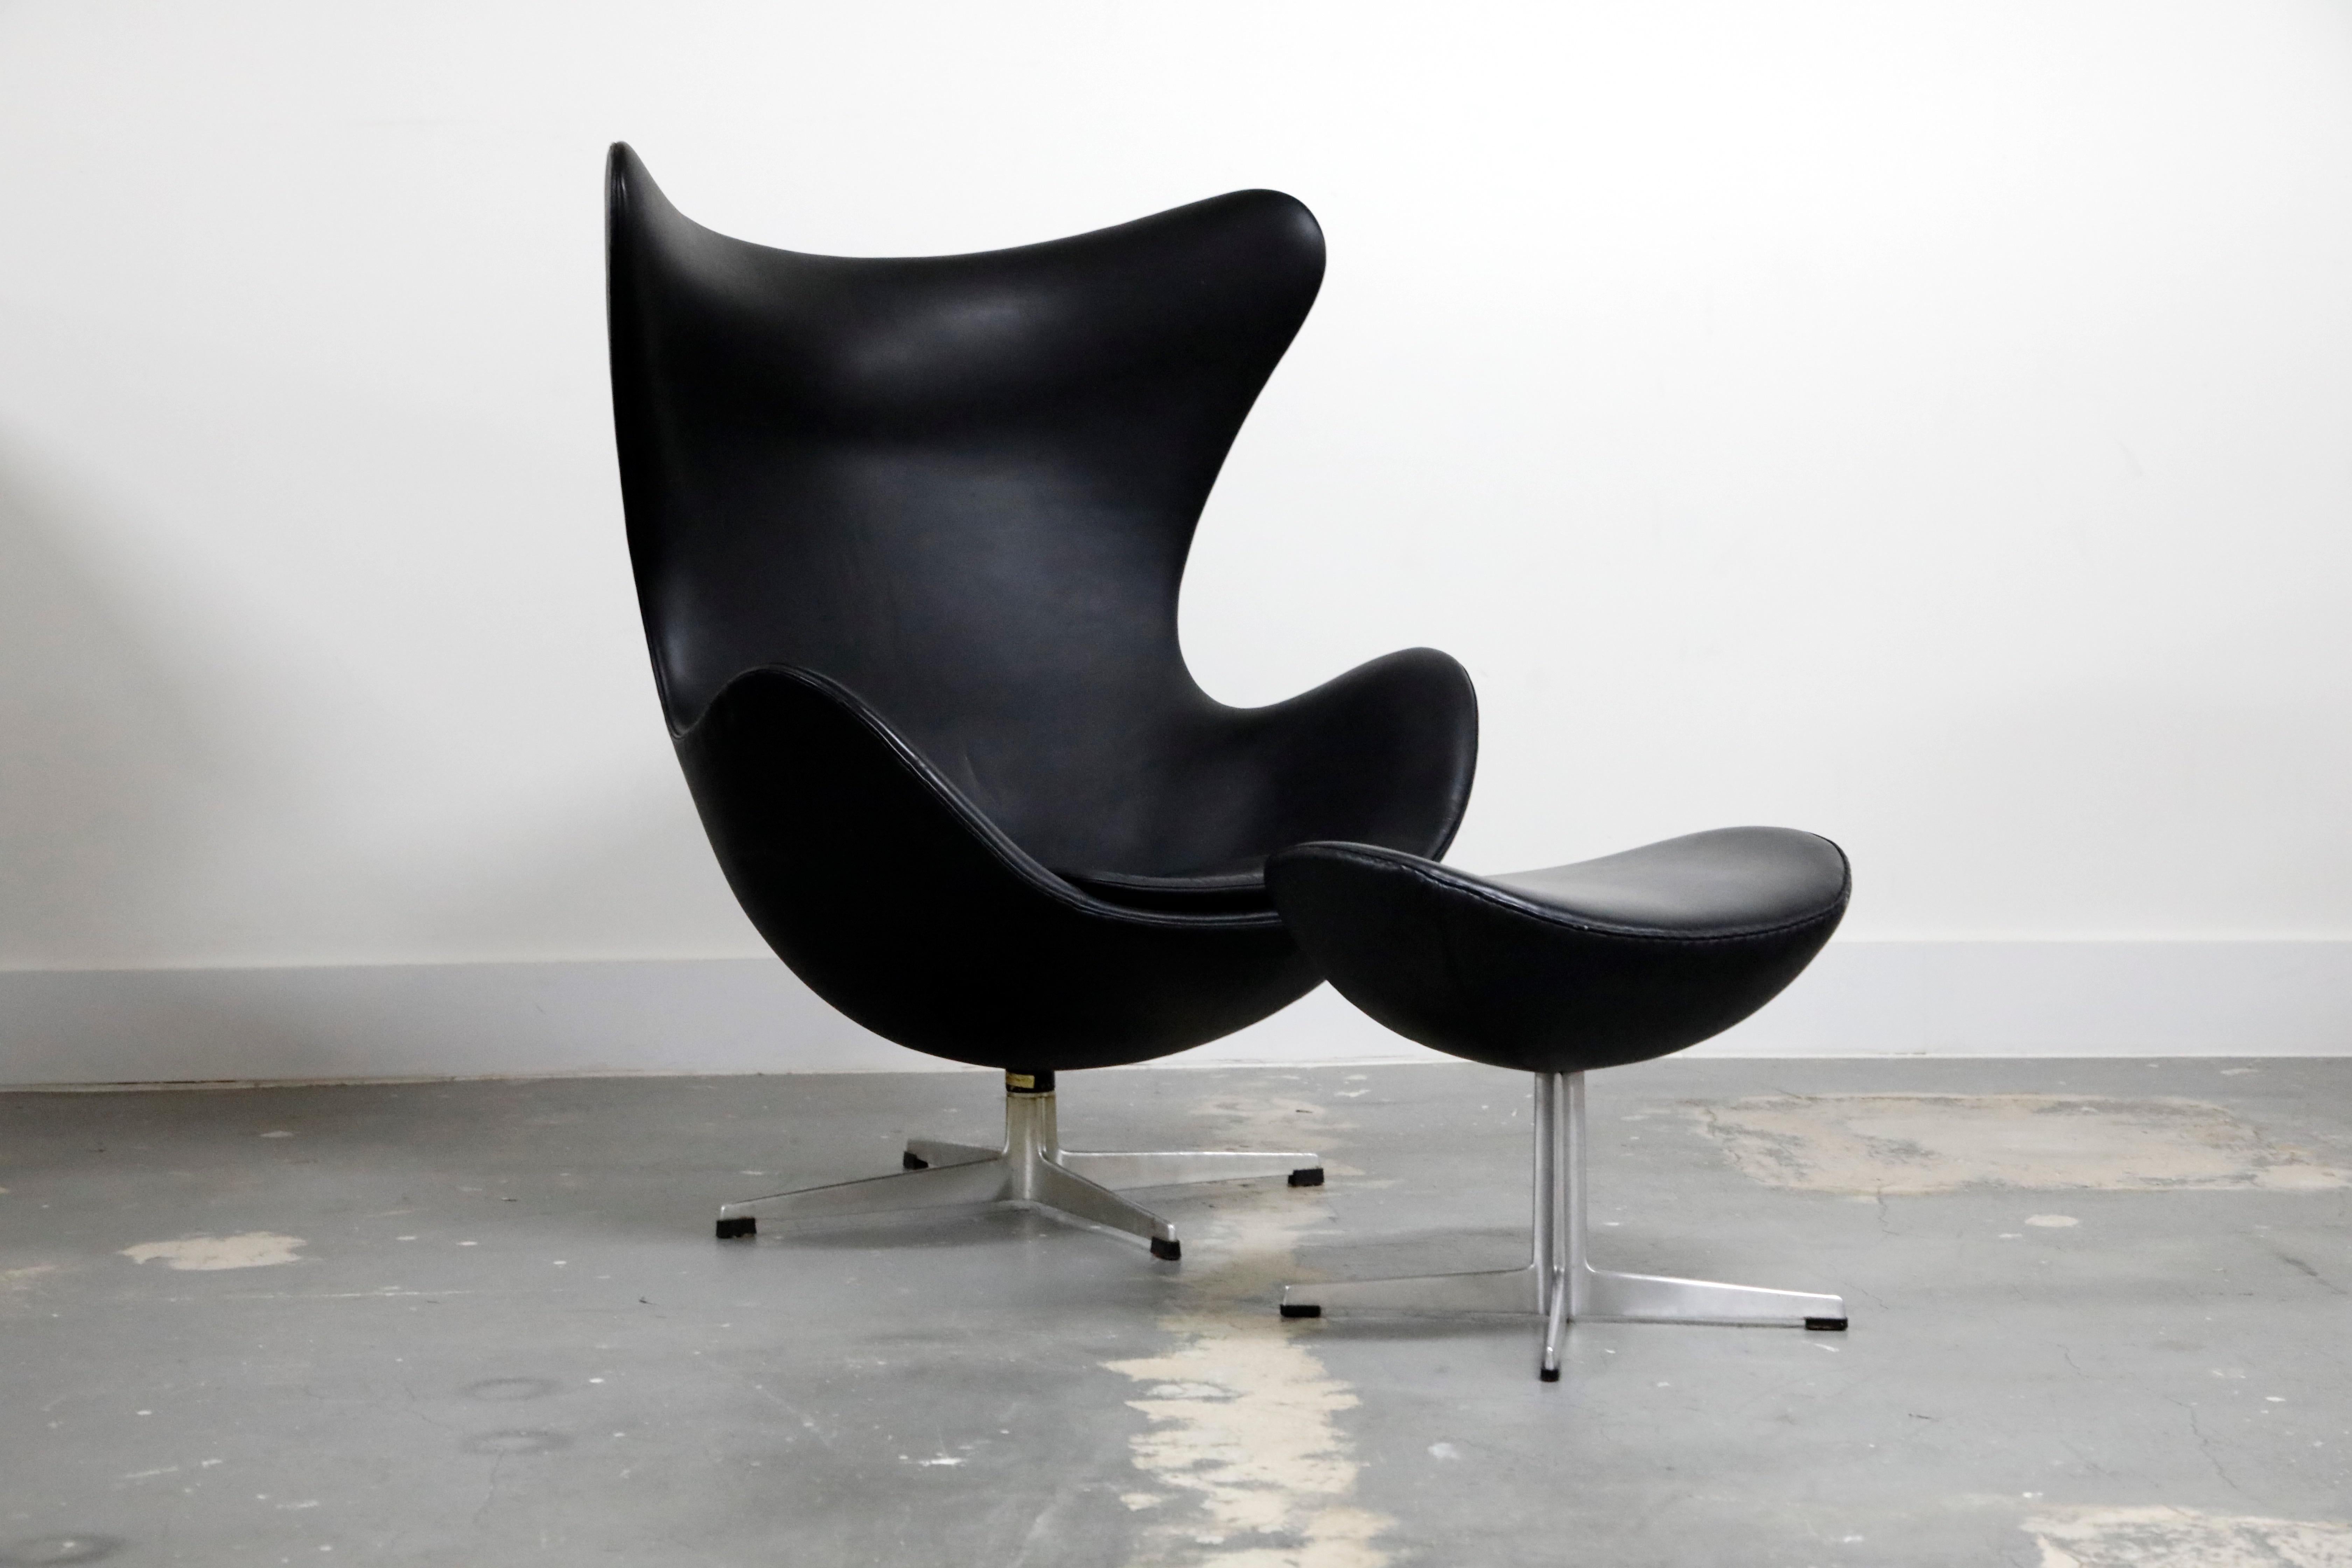 This iconic black leather egg chair by Arne Jacobsen is an all-original 1965 production by Fritz Hansen and signed underneath both pieces with the original date-stamped foil labels. The Classic and timeless (original) black leather is one of the